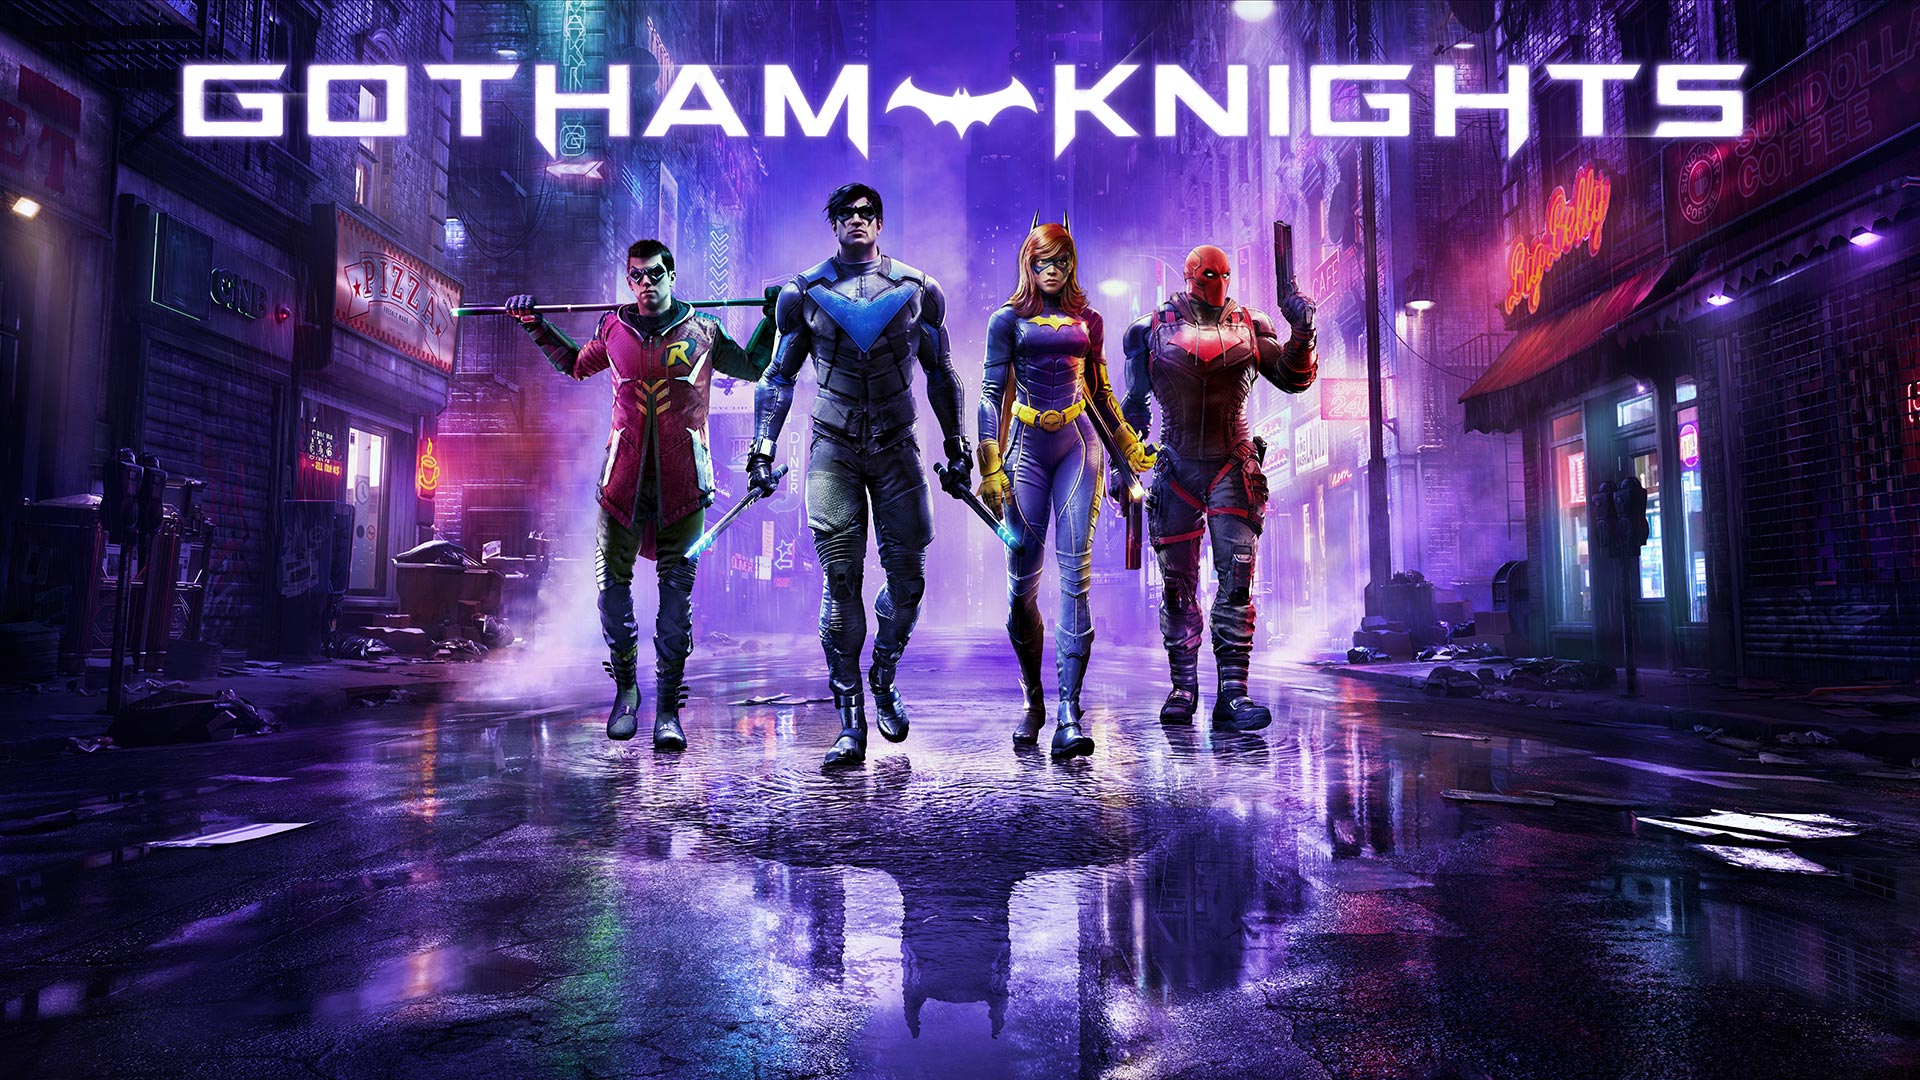 Image for Gotham Knights release date set for October